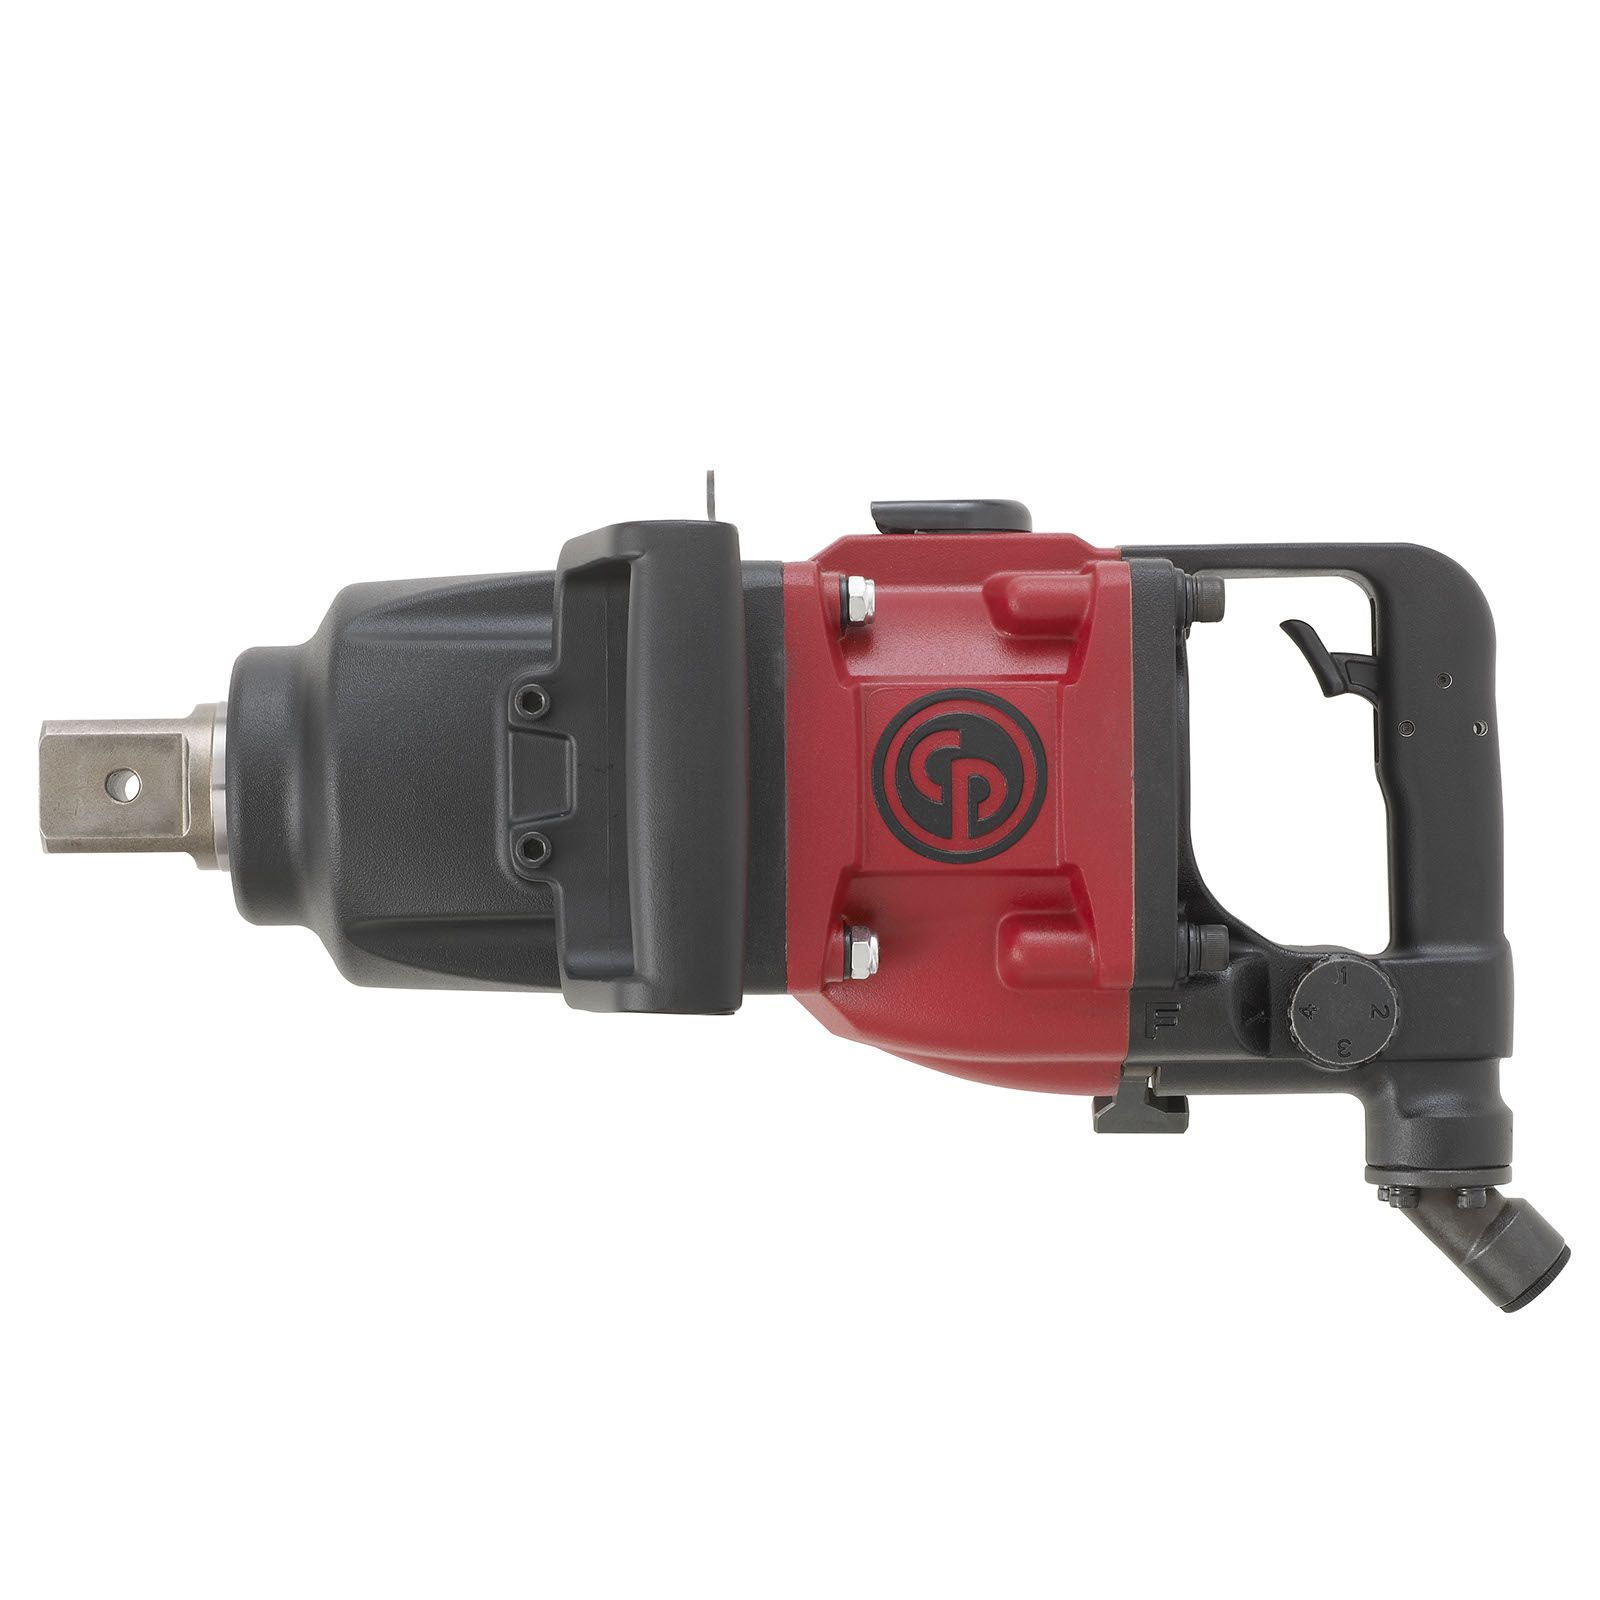 CP6930-D35 product photo